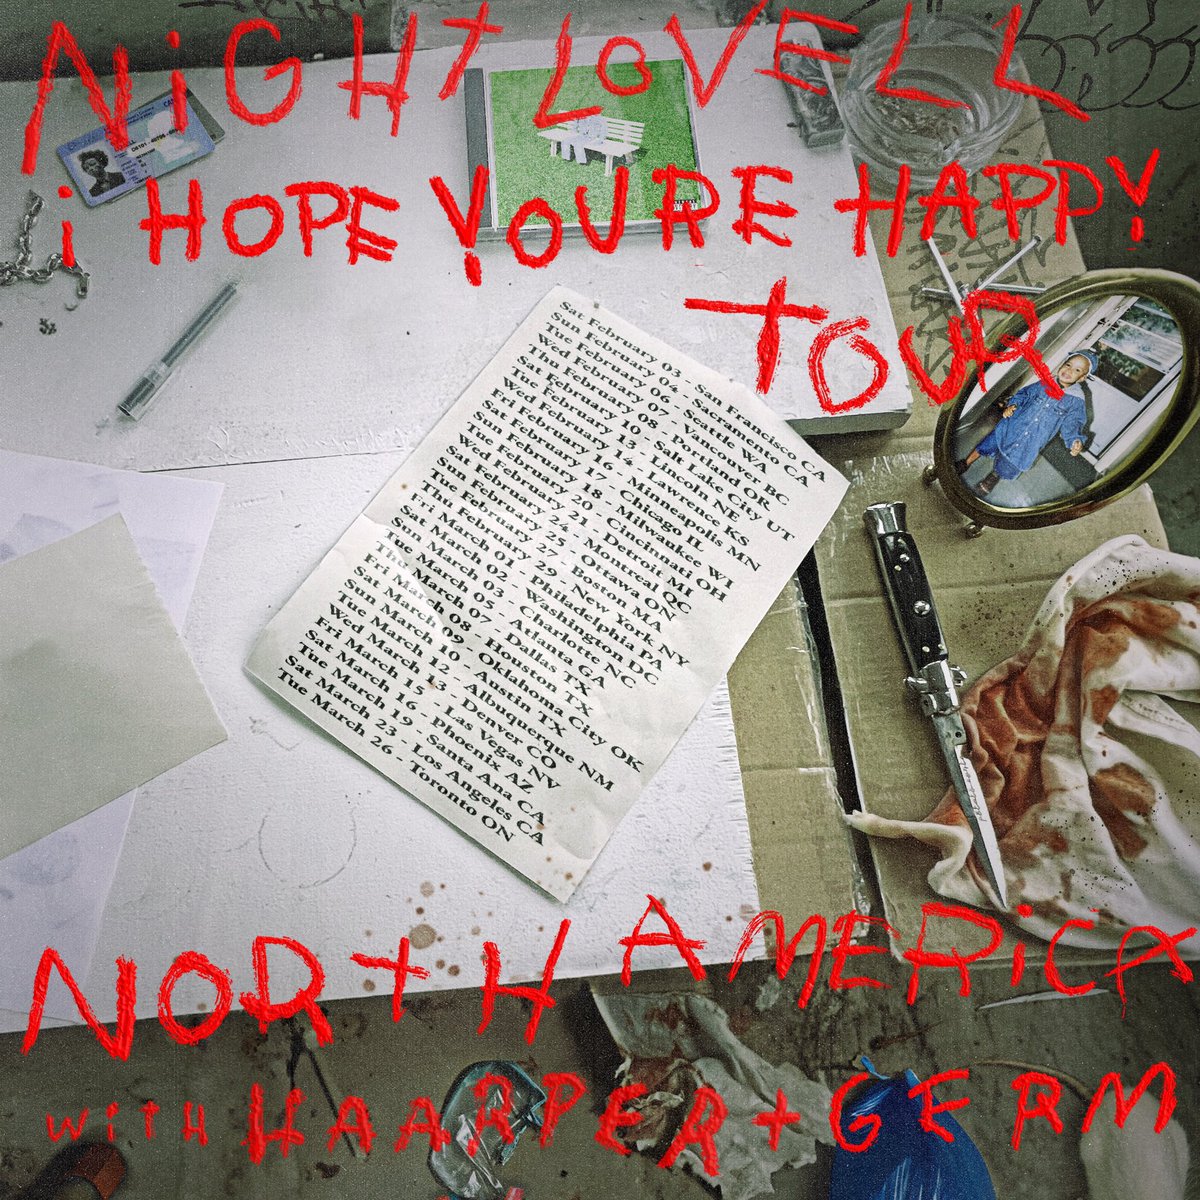 I HOPE YOU’RE HAPPY TOUR STARTS IN ONE MONTH. GET TICKETS @ NIGHTLOVELL.COM